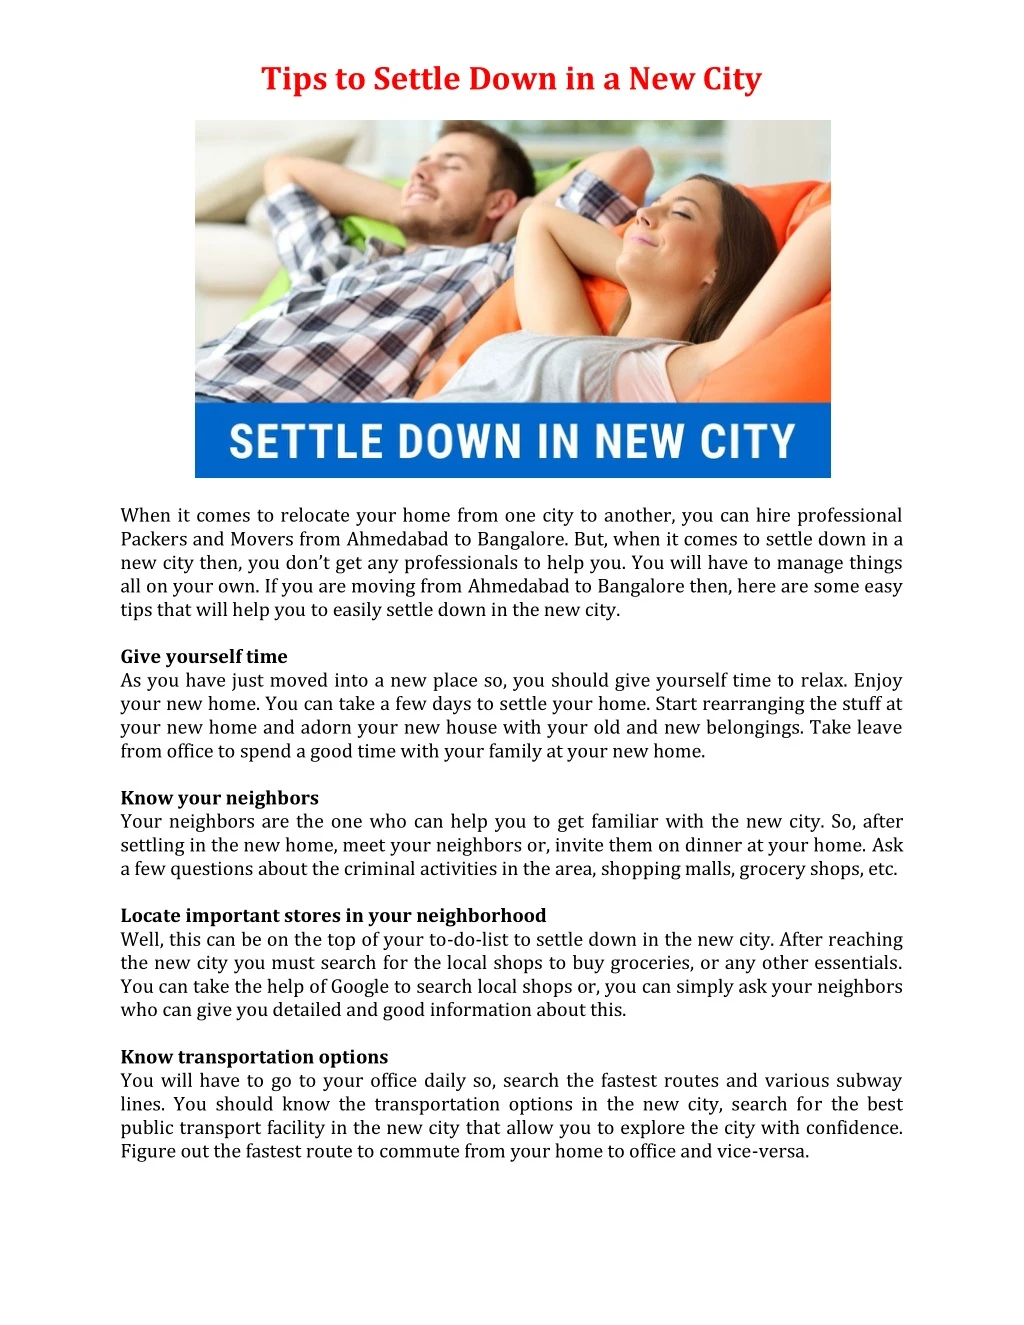 tips to settle down in a new city